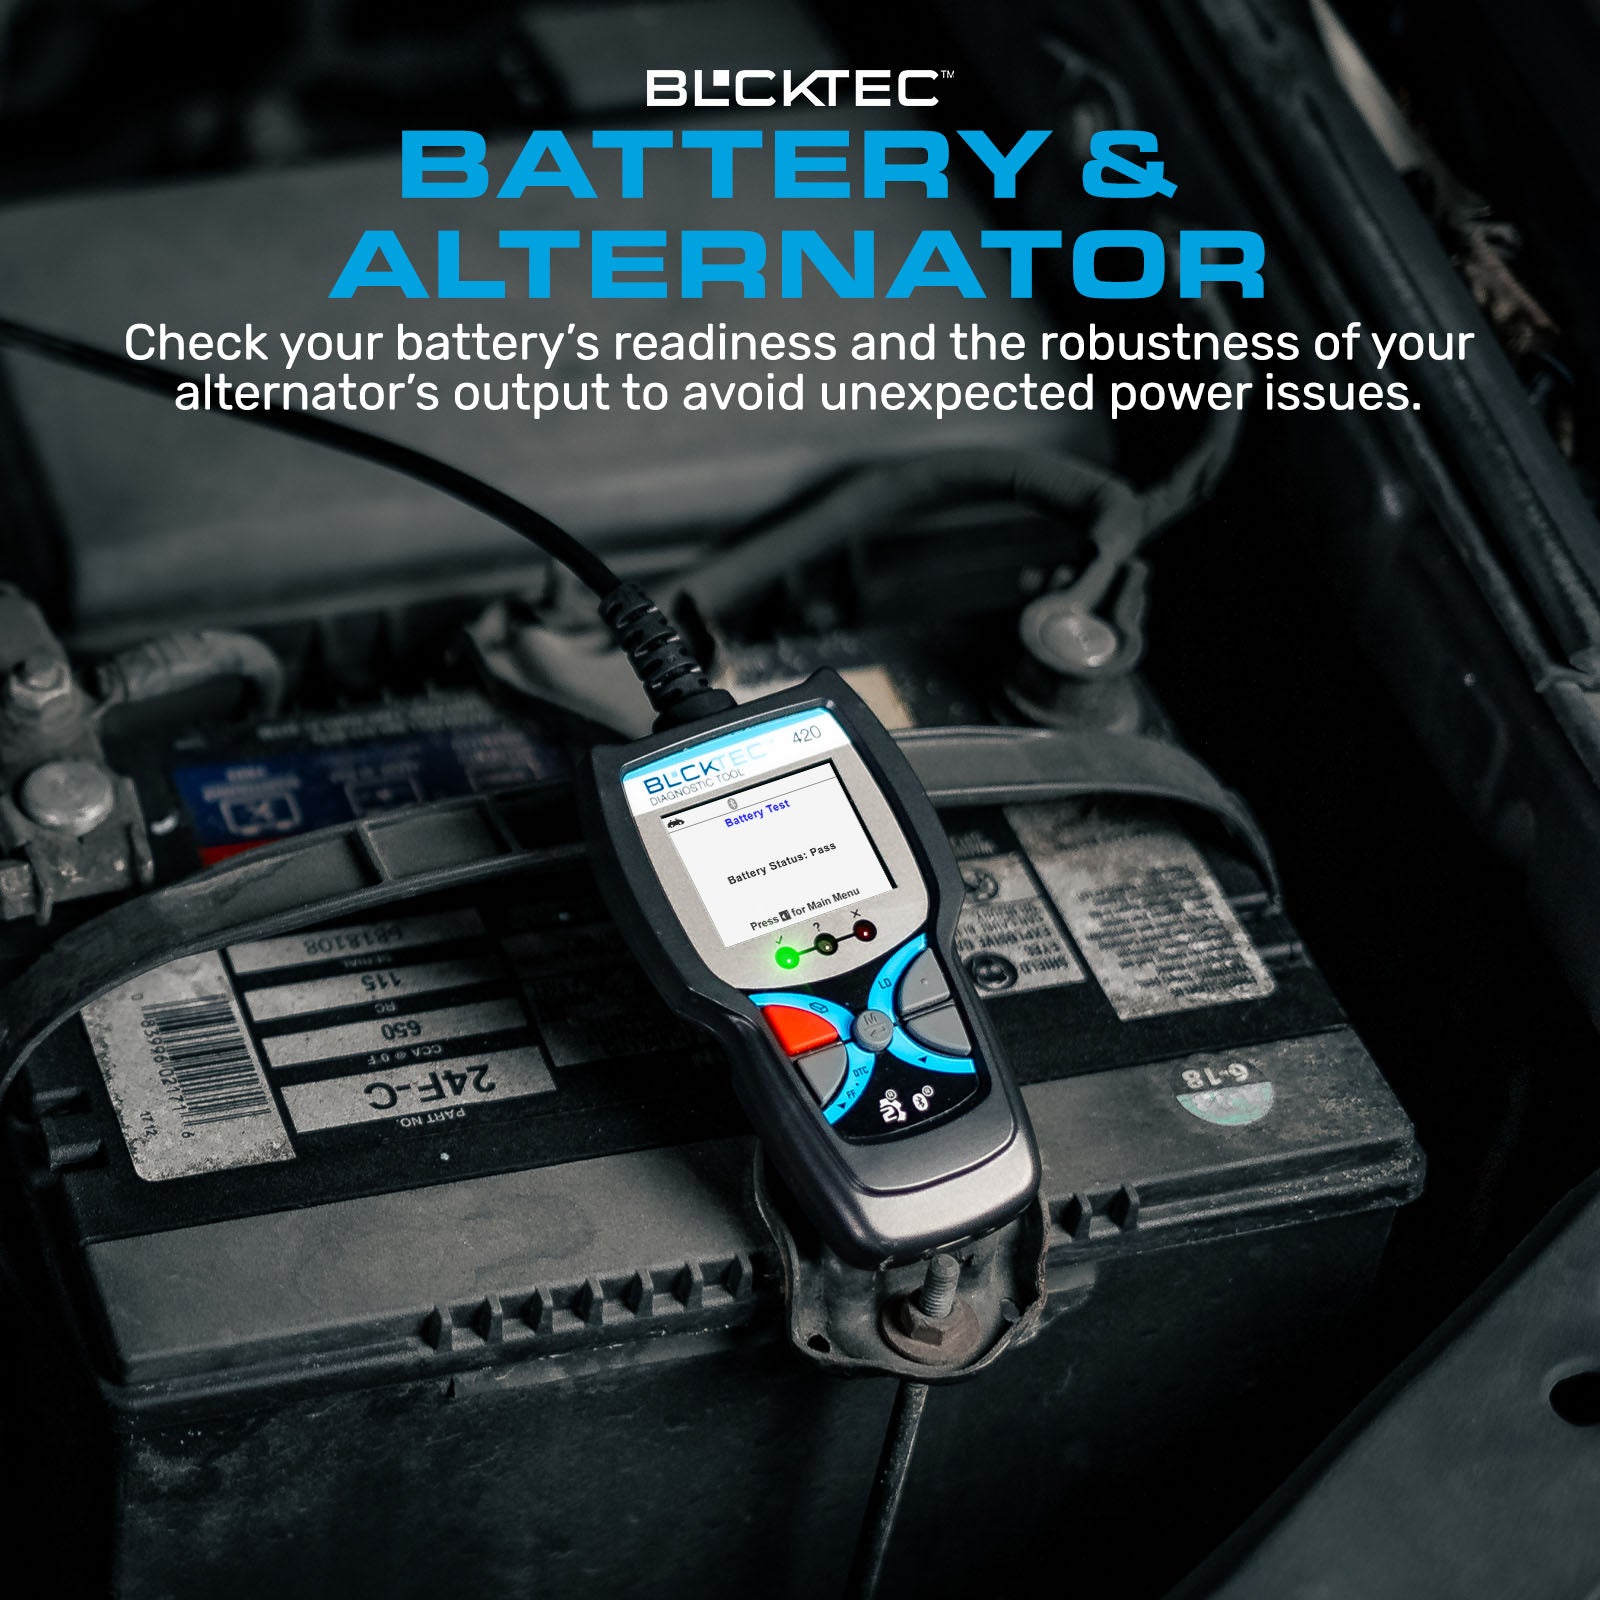 BLCKTEC 420 OBD2 scanner tests your battery and alternator to avoid unexpected power issues.